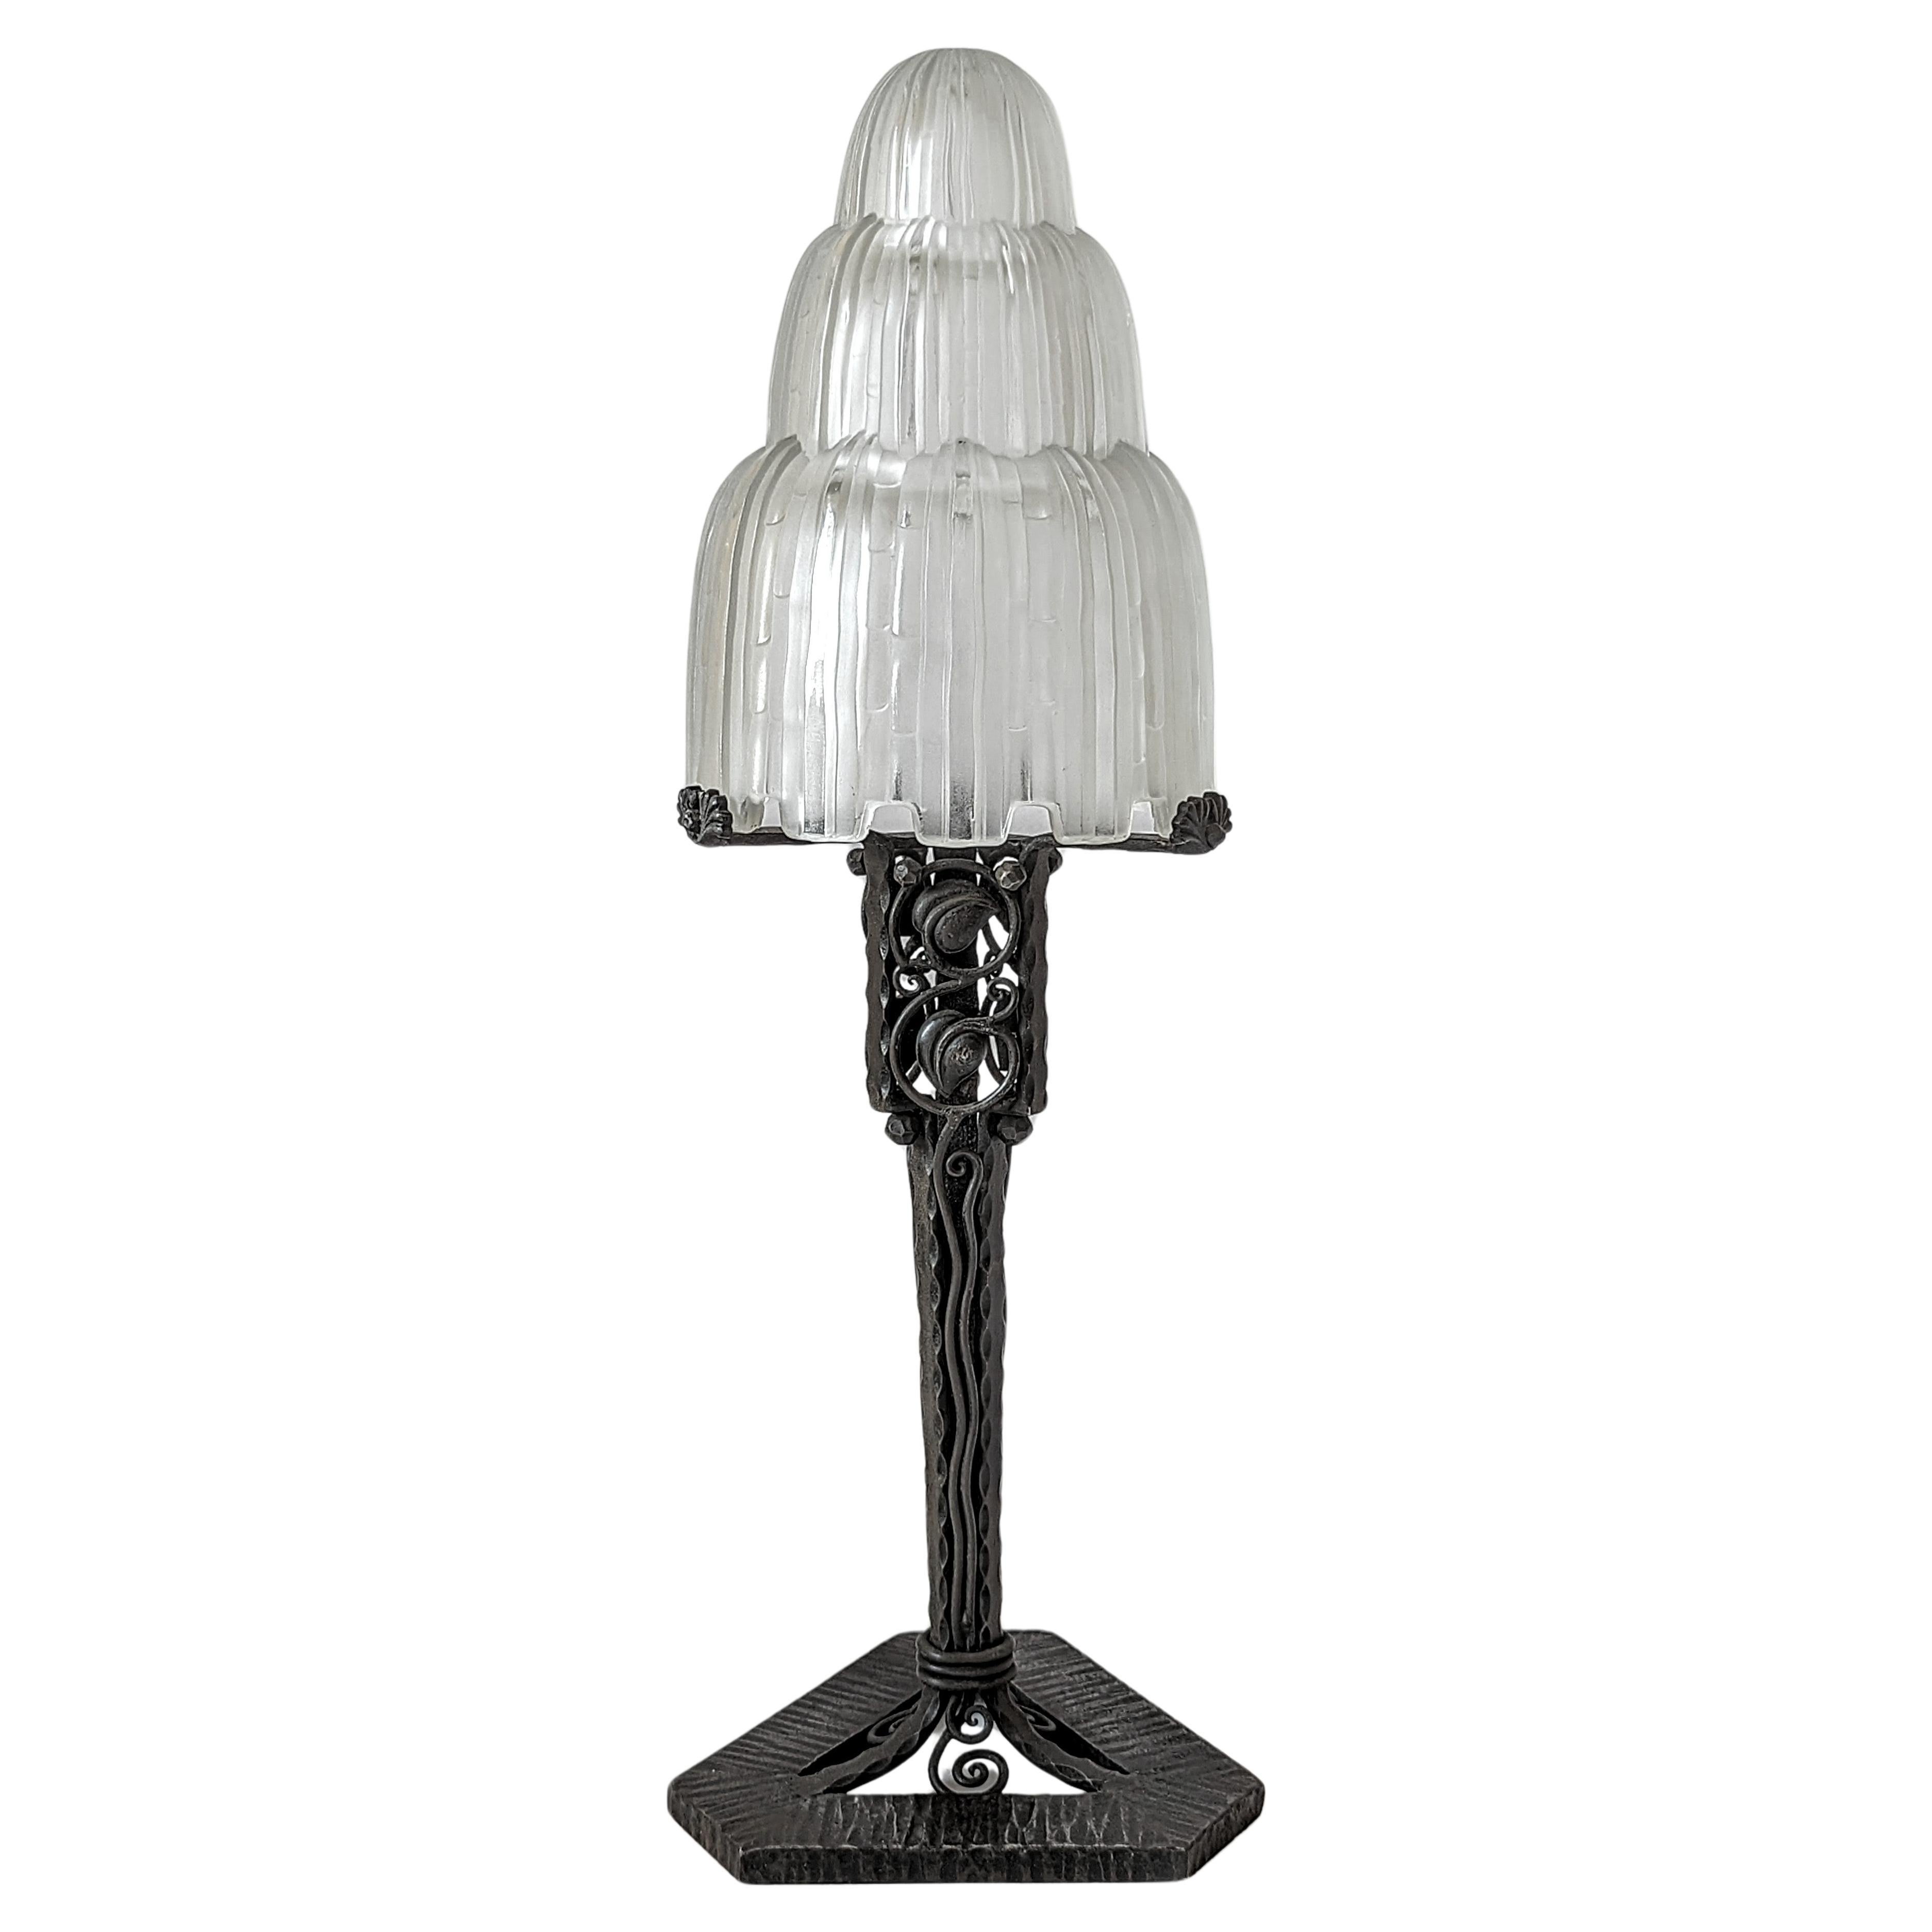 A French Art Deco Lamp by Edgar Brandt with Waterfall Sabino Shade For Sale